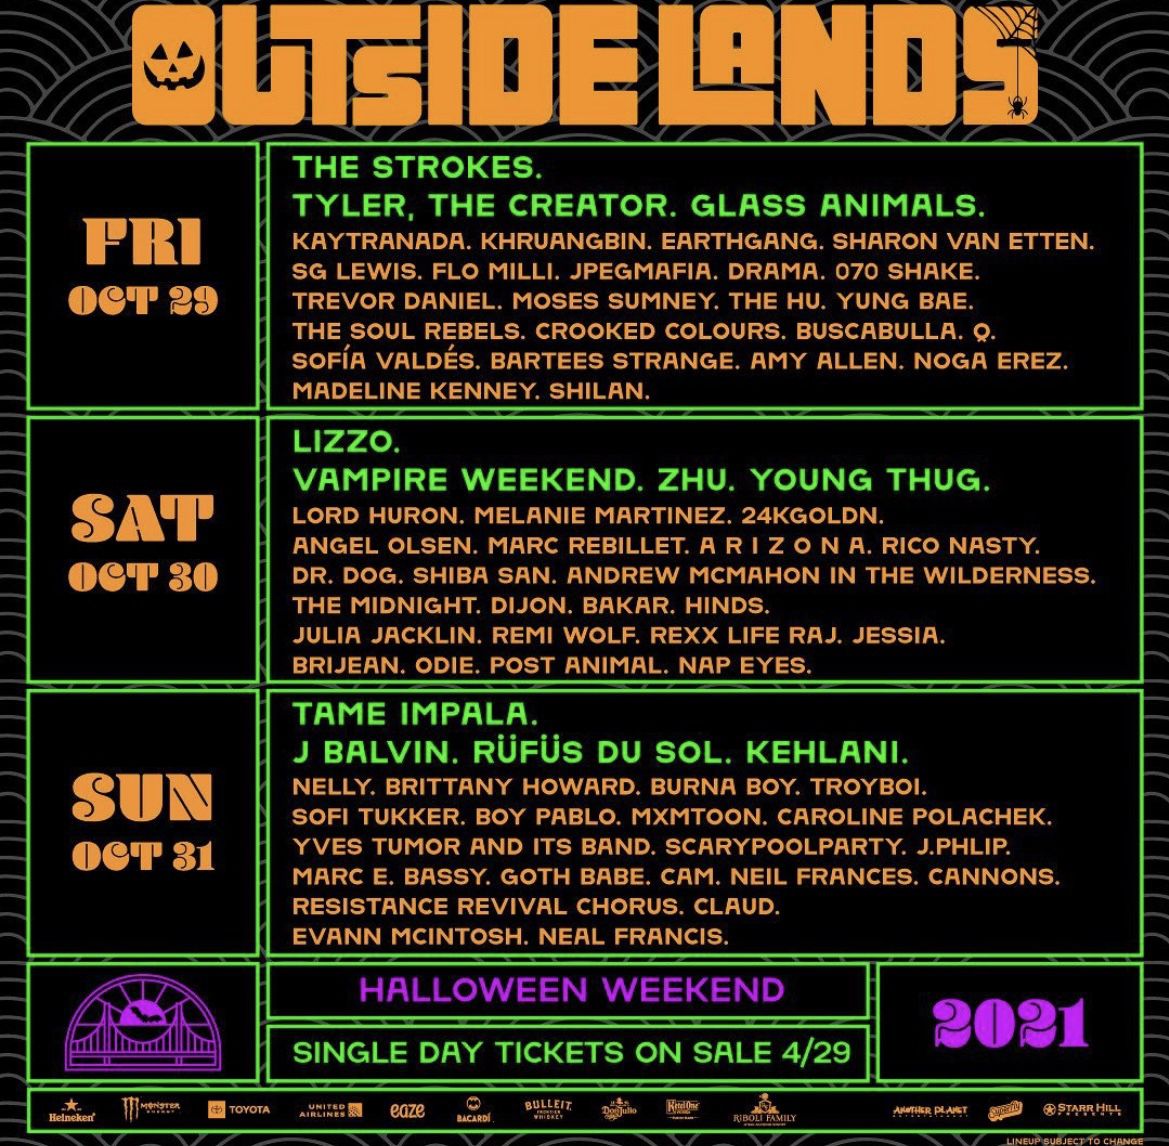 Outside Lands - 3 Day ticket